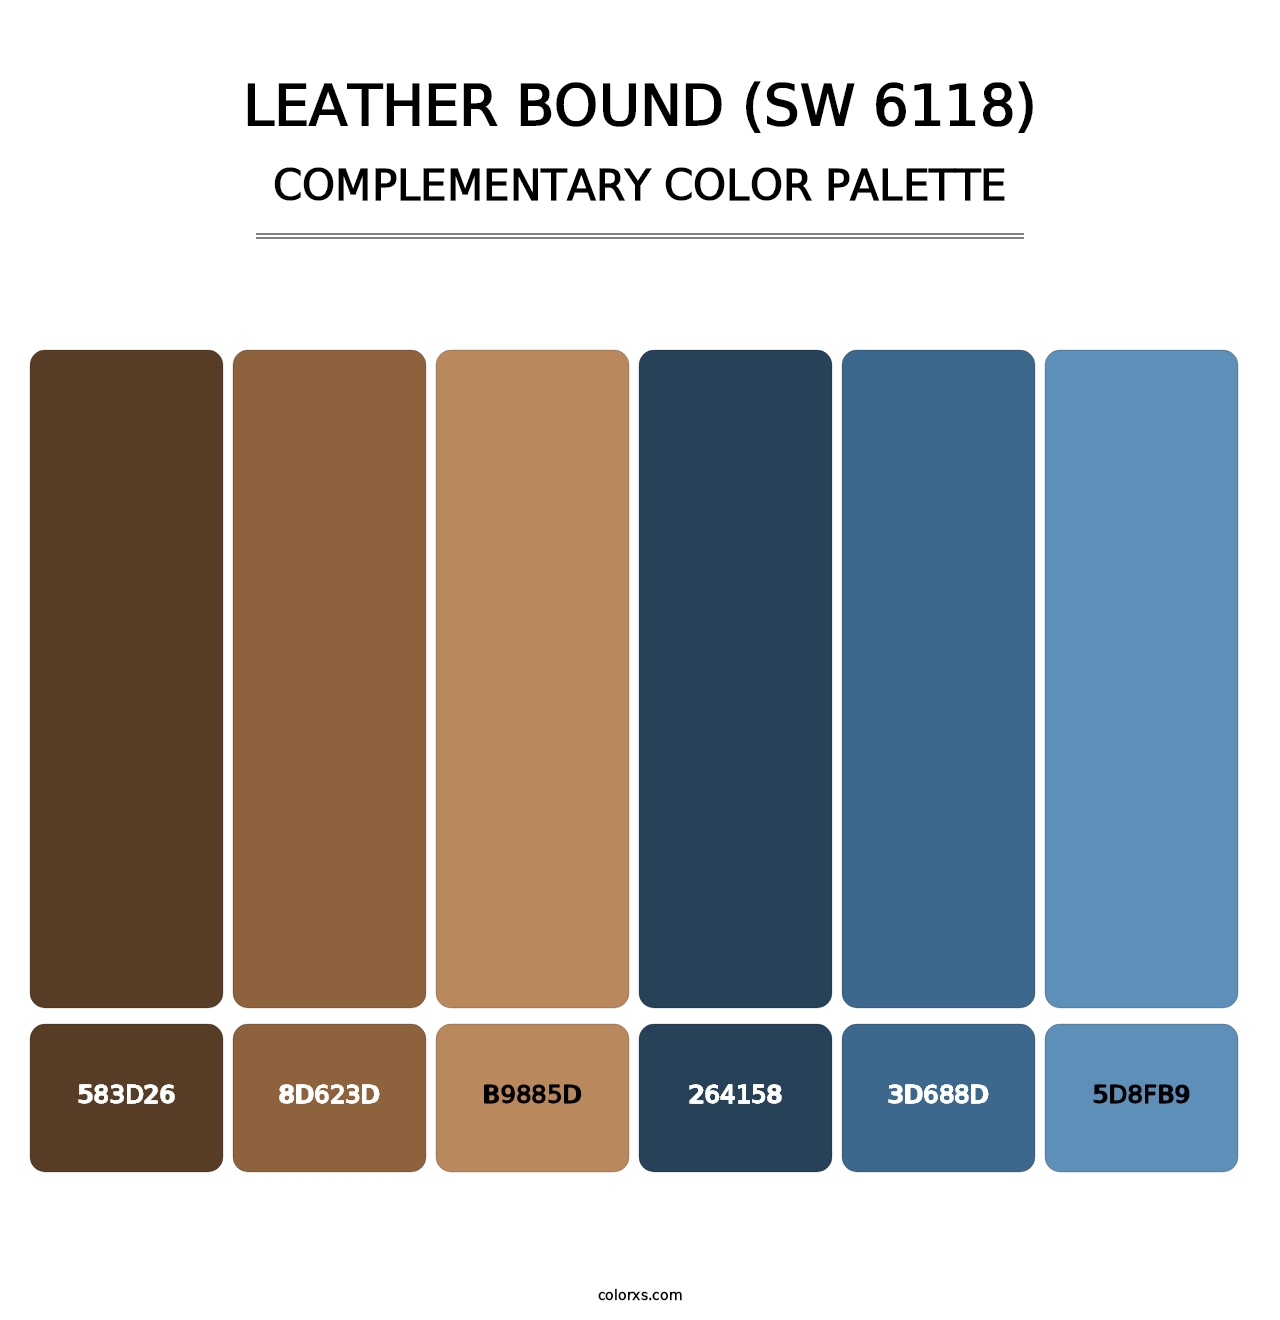 Leather Bound (SW 6118) - Complementary Color Palette